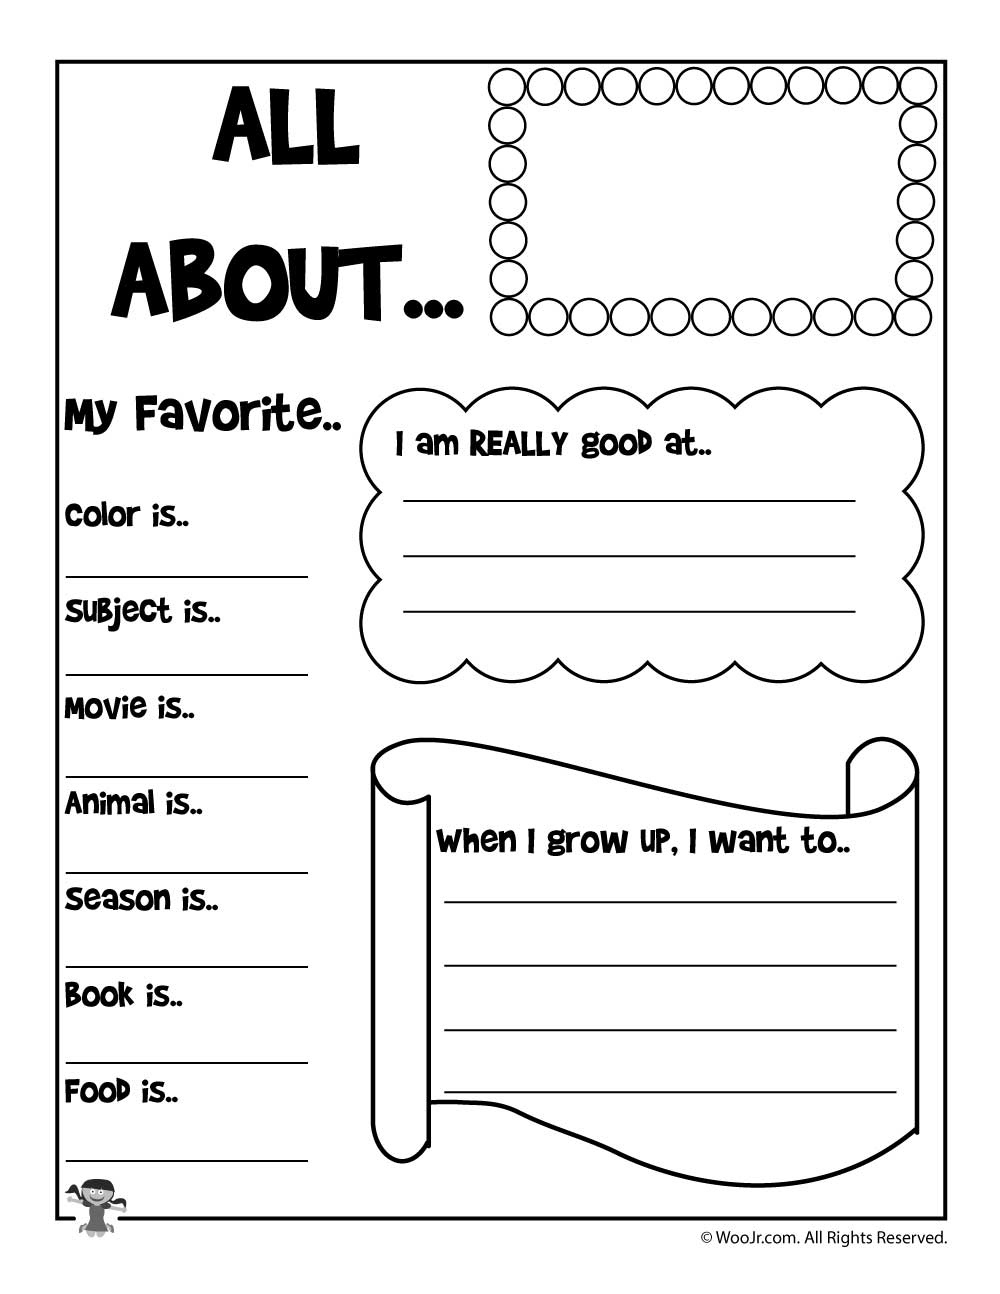 all-about-me-worksheets-for-kids-printable